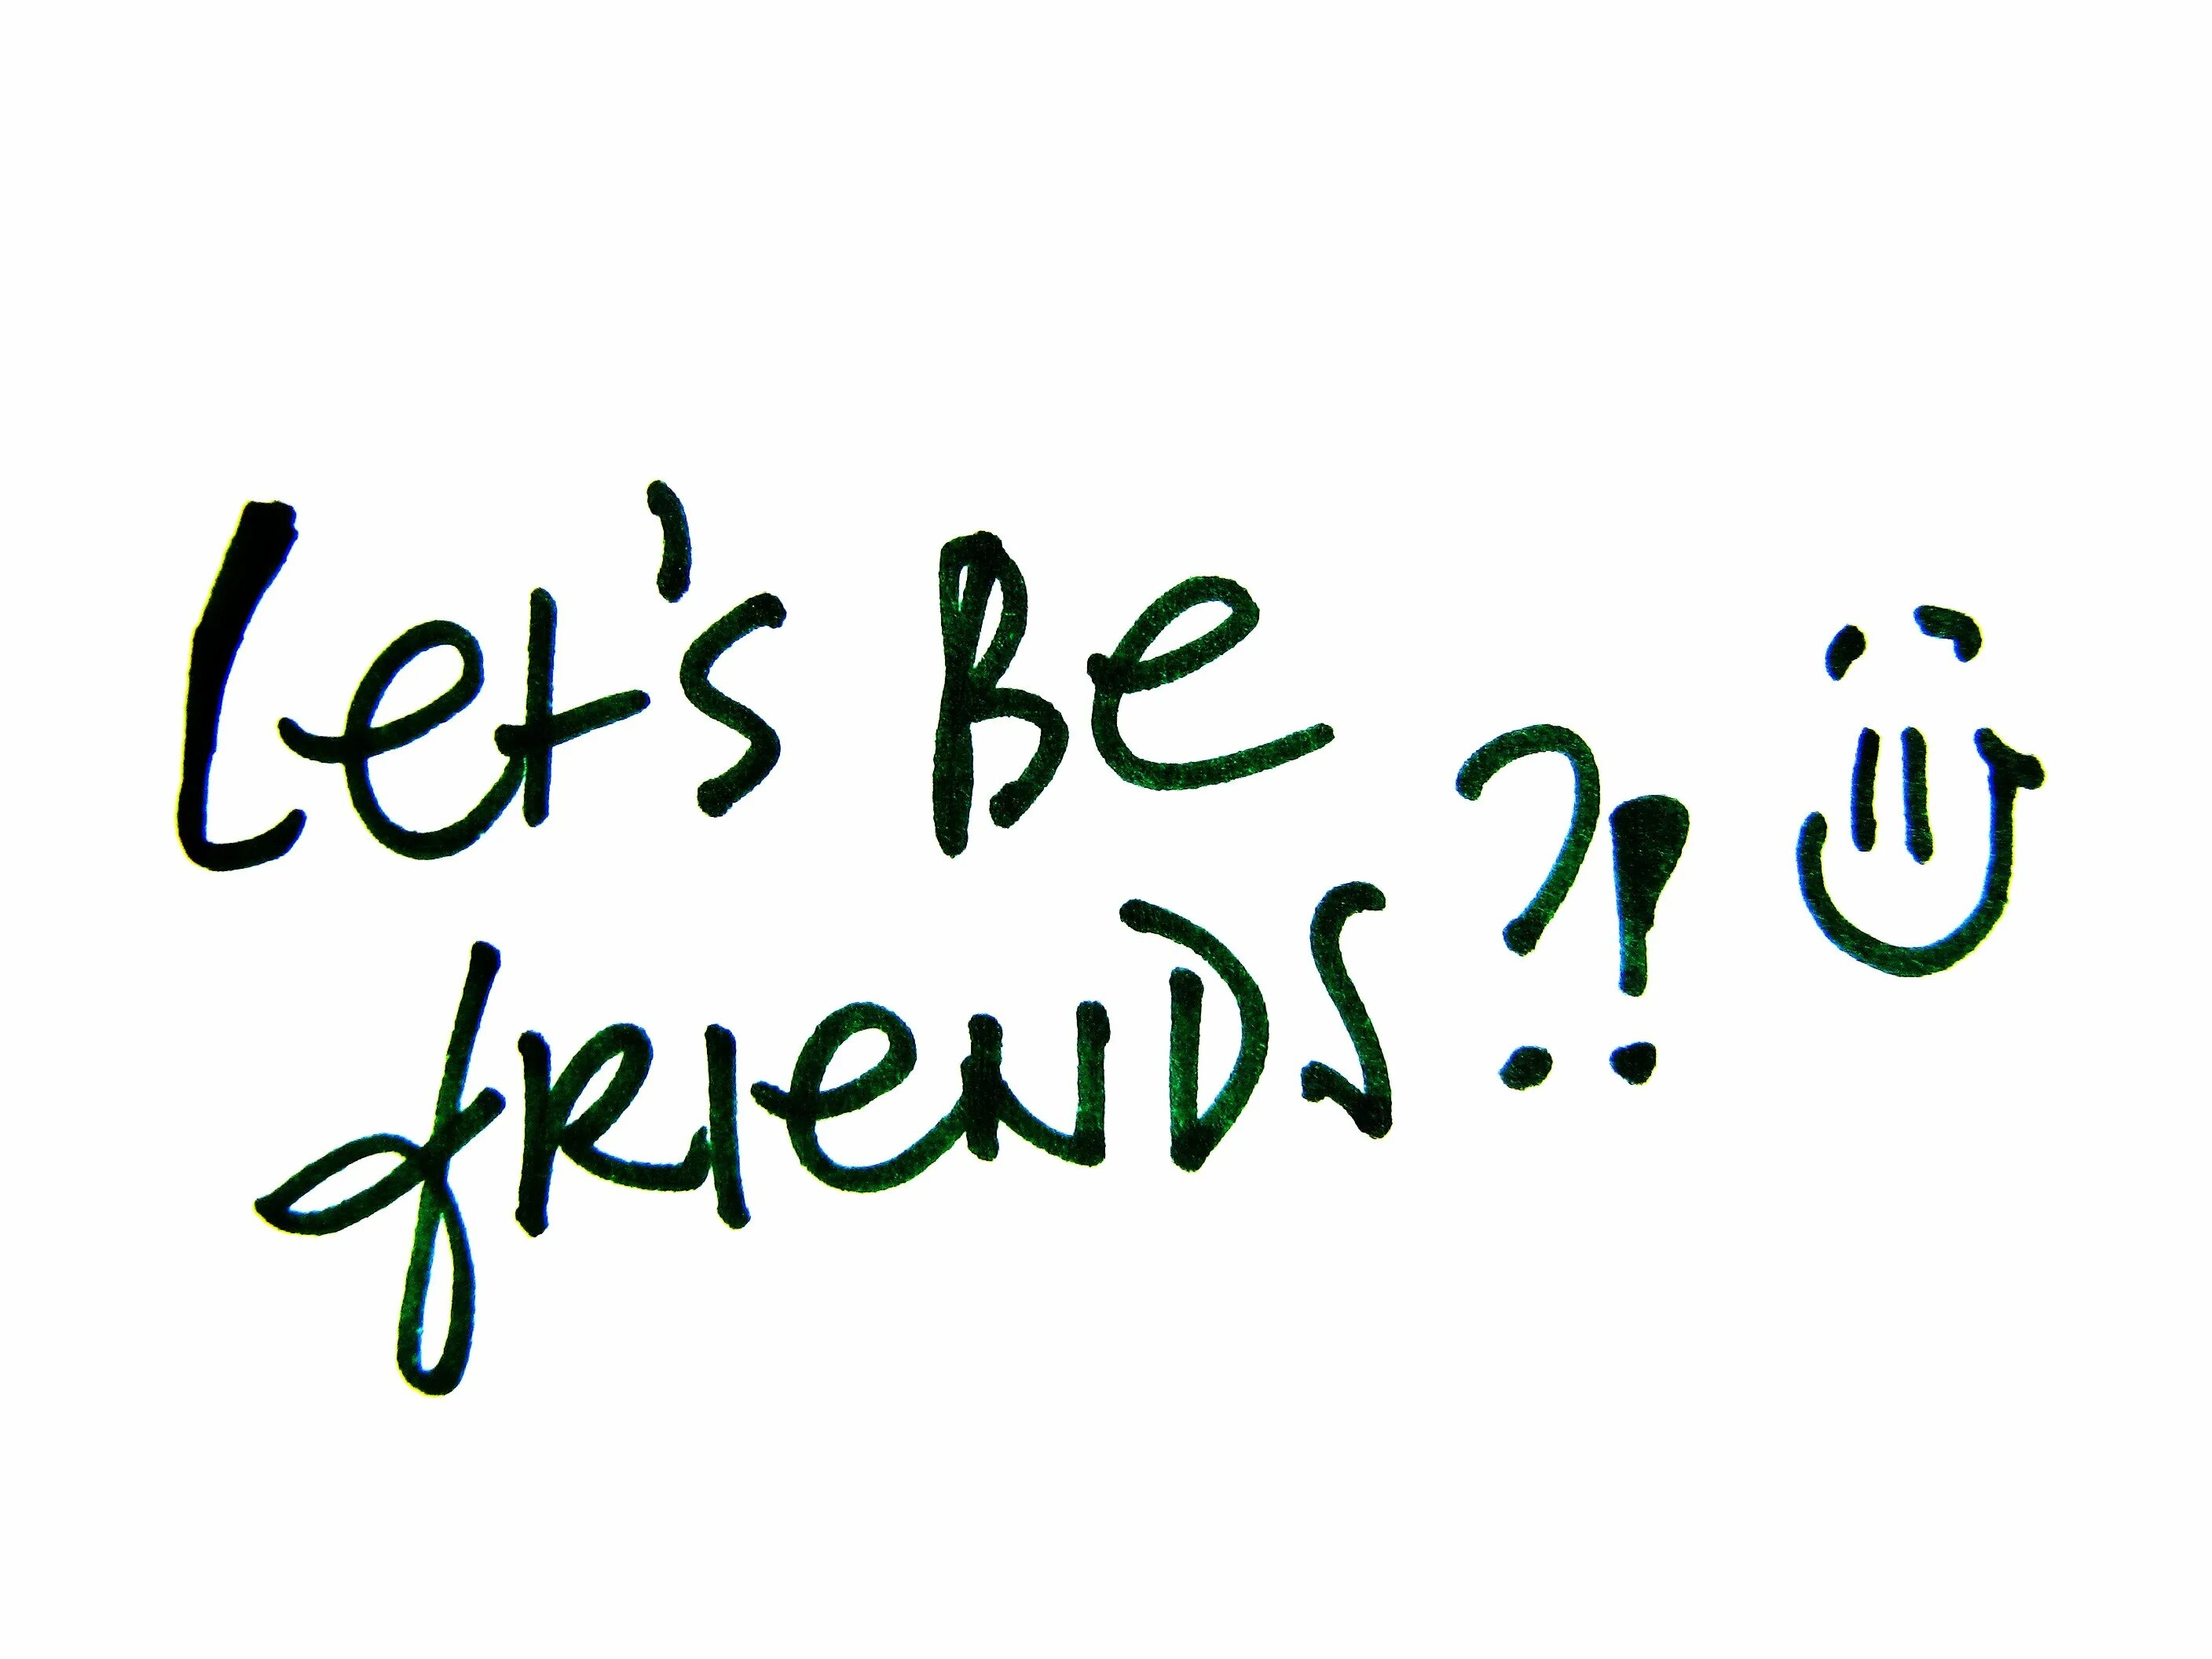 Easy and friends. Картинки Let's be friends. Be a friend. Картинка be a friend. Let`s make friends.